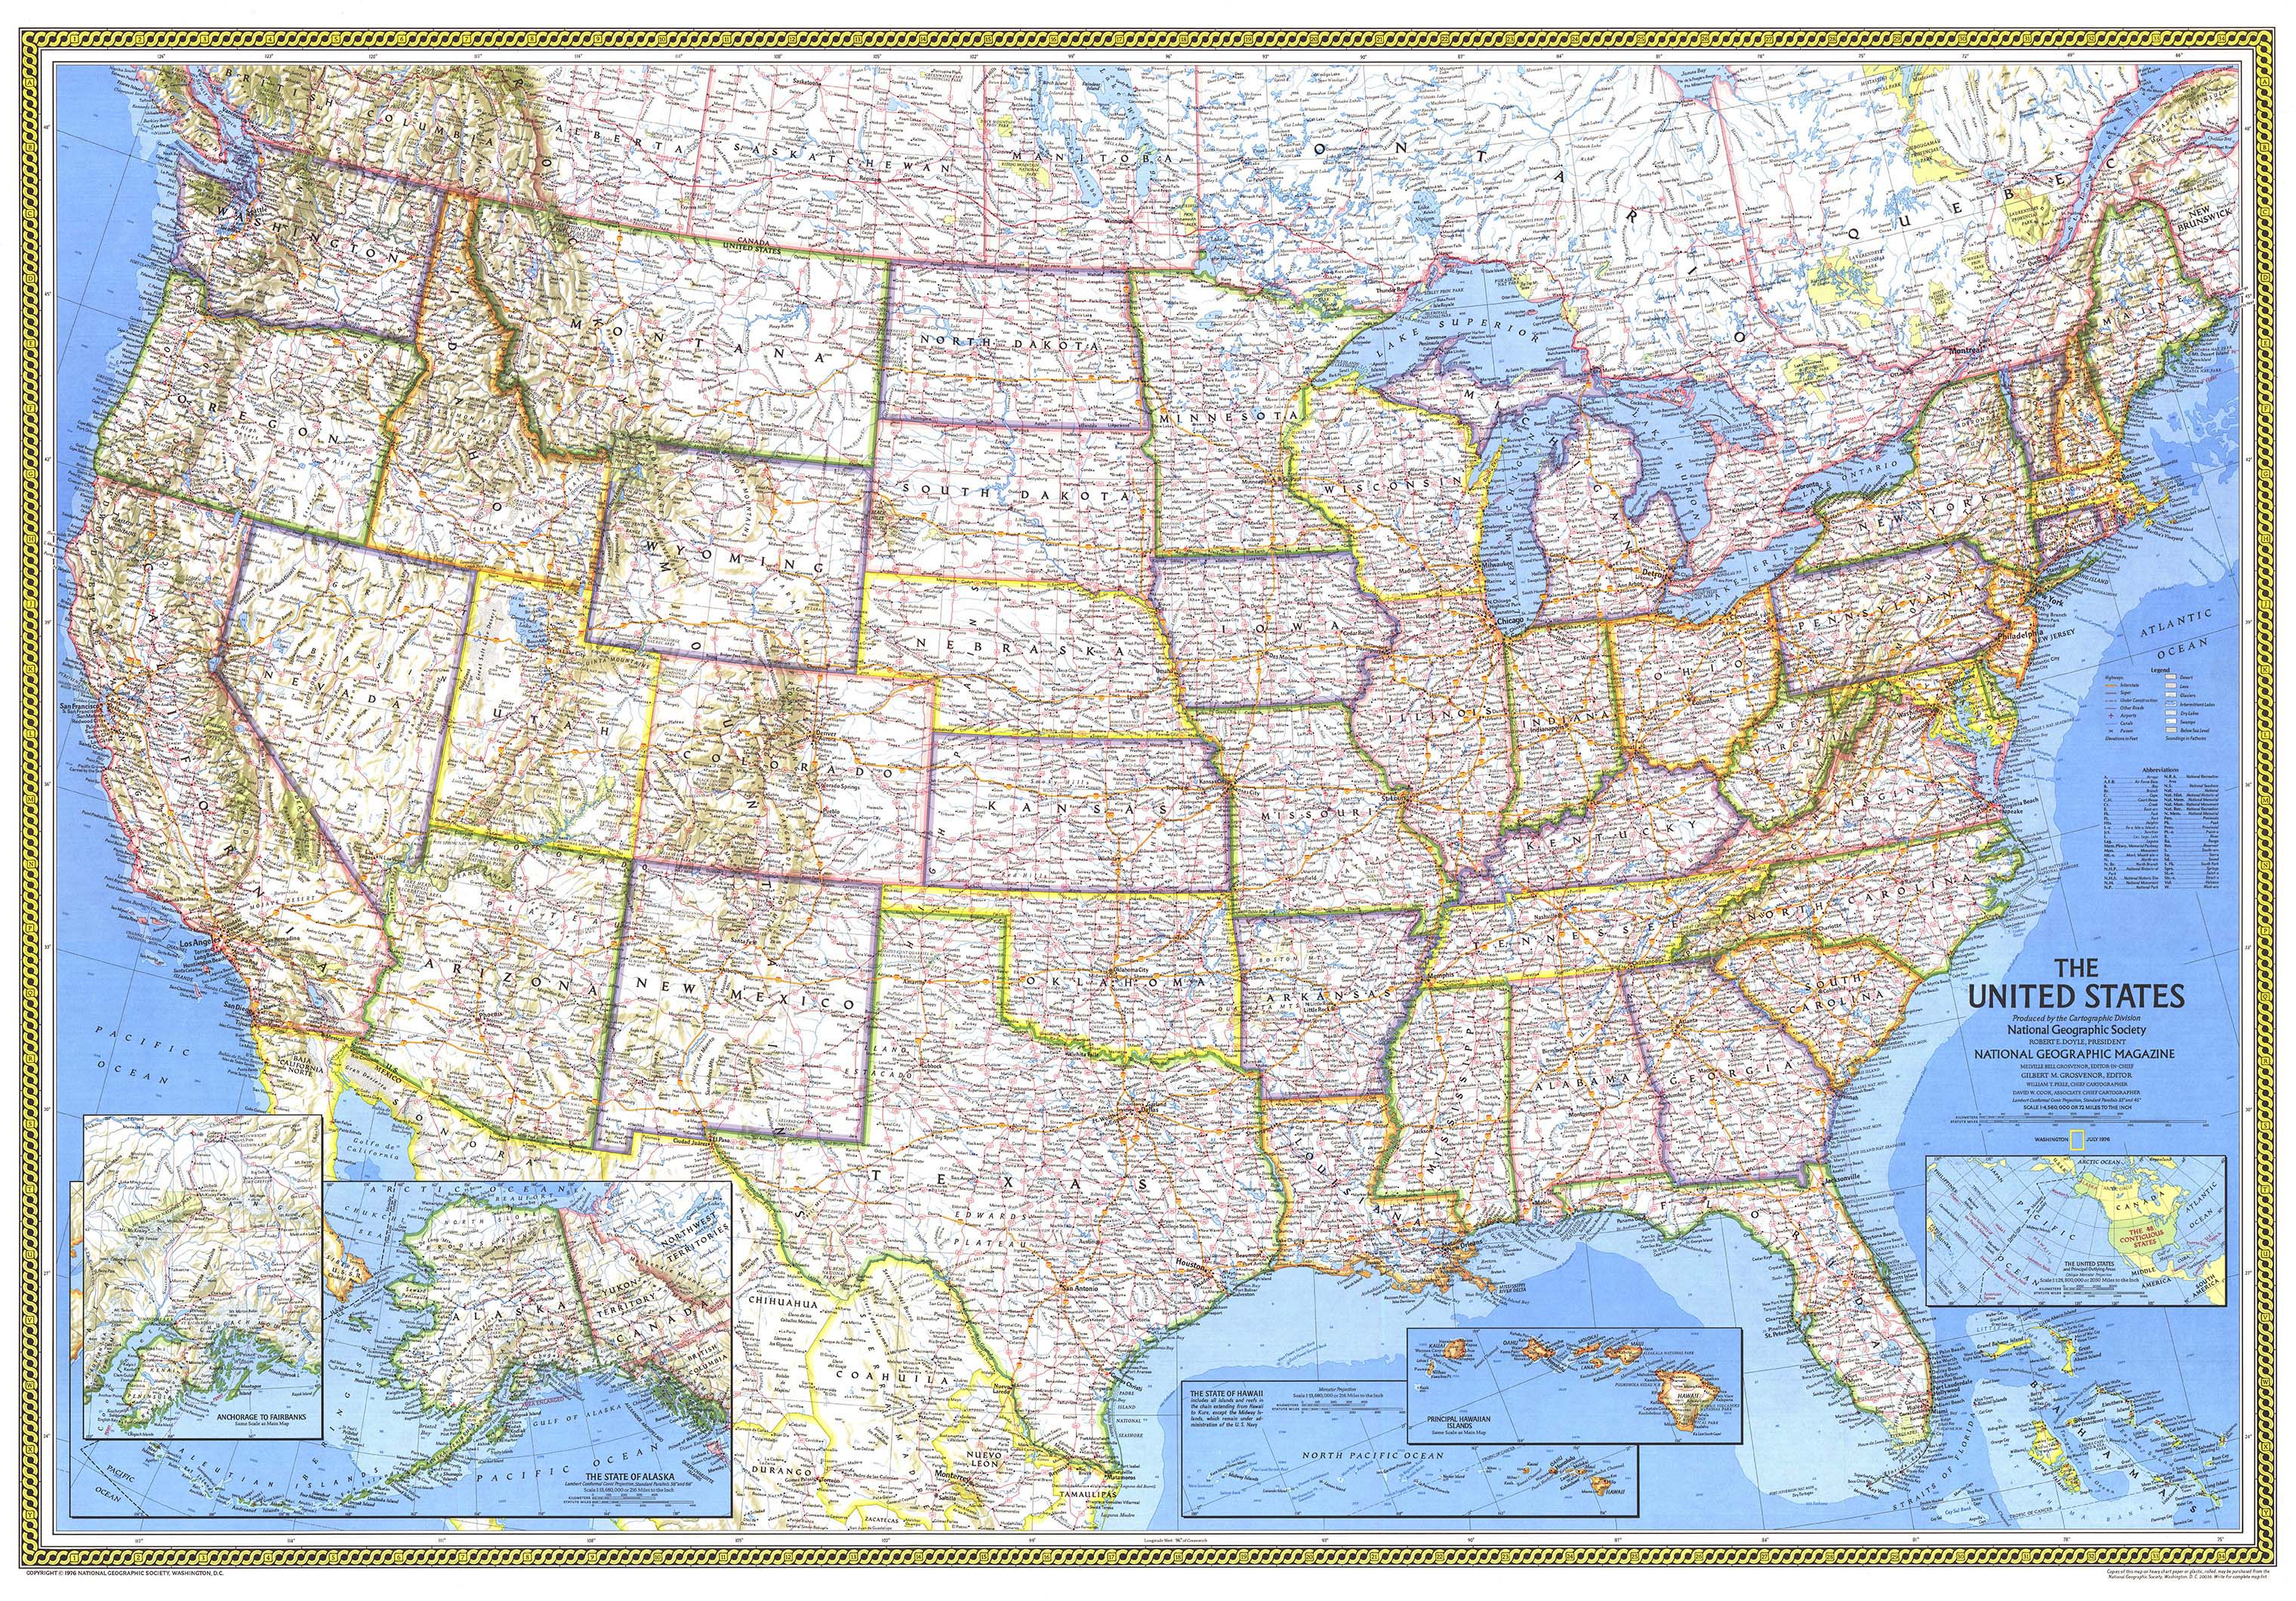 The United States 1976 Wall Map By National Geographic Mapsales